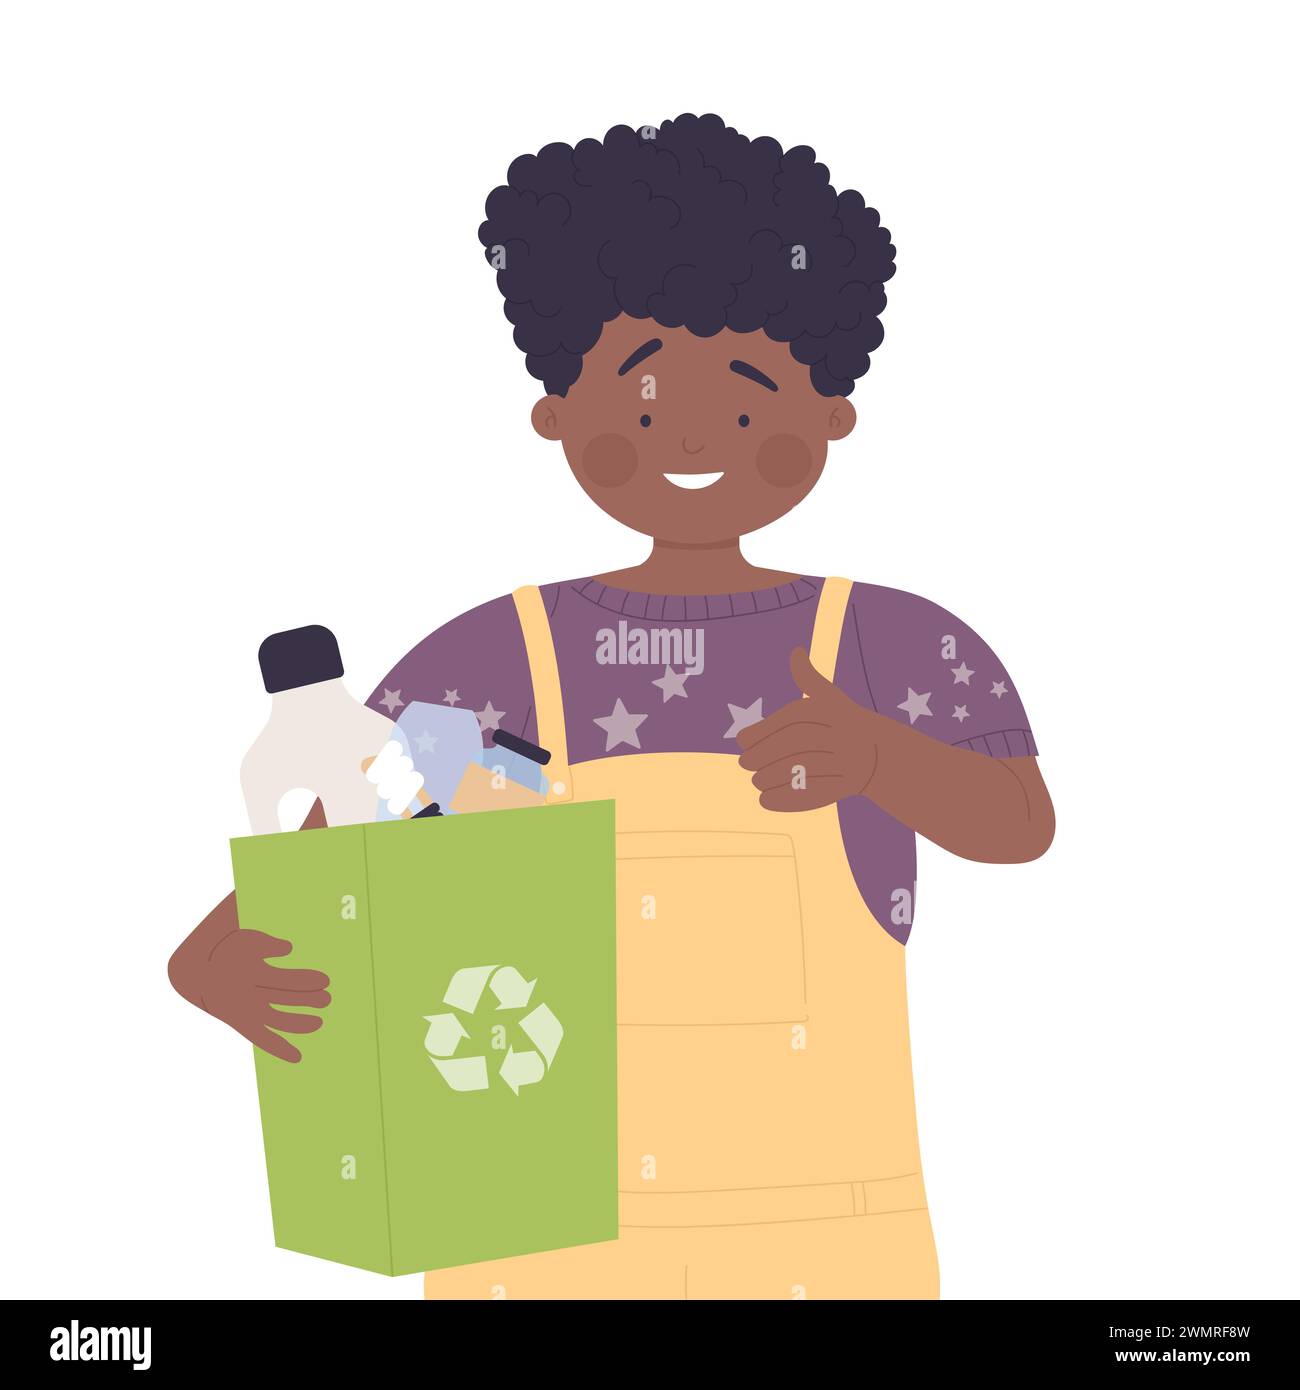 Little kid with recycling bag. Waste management, zero waste kids cartoon vector illustration Stock Vector